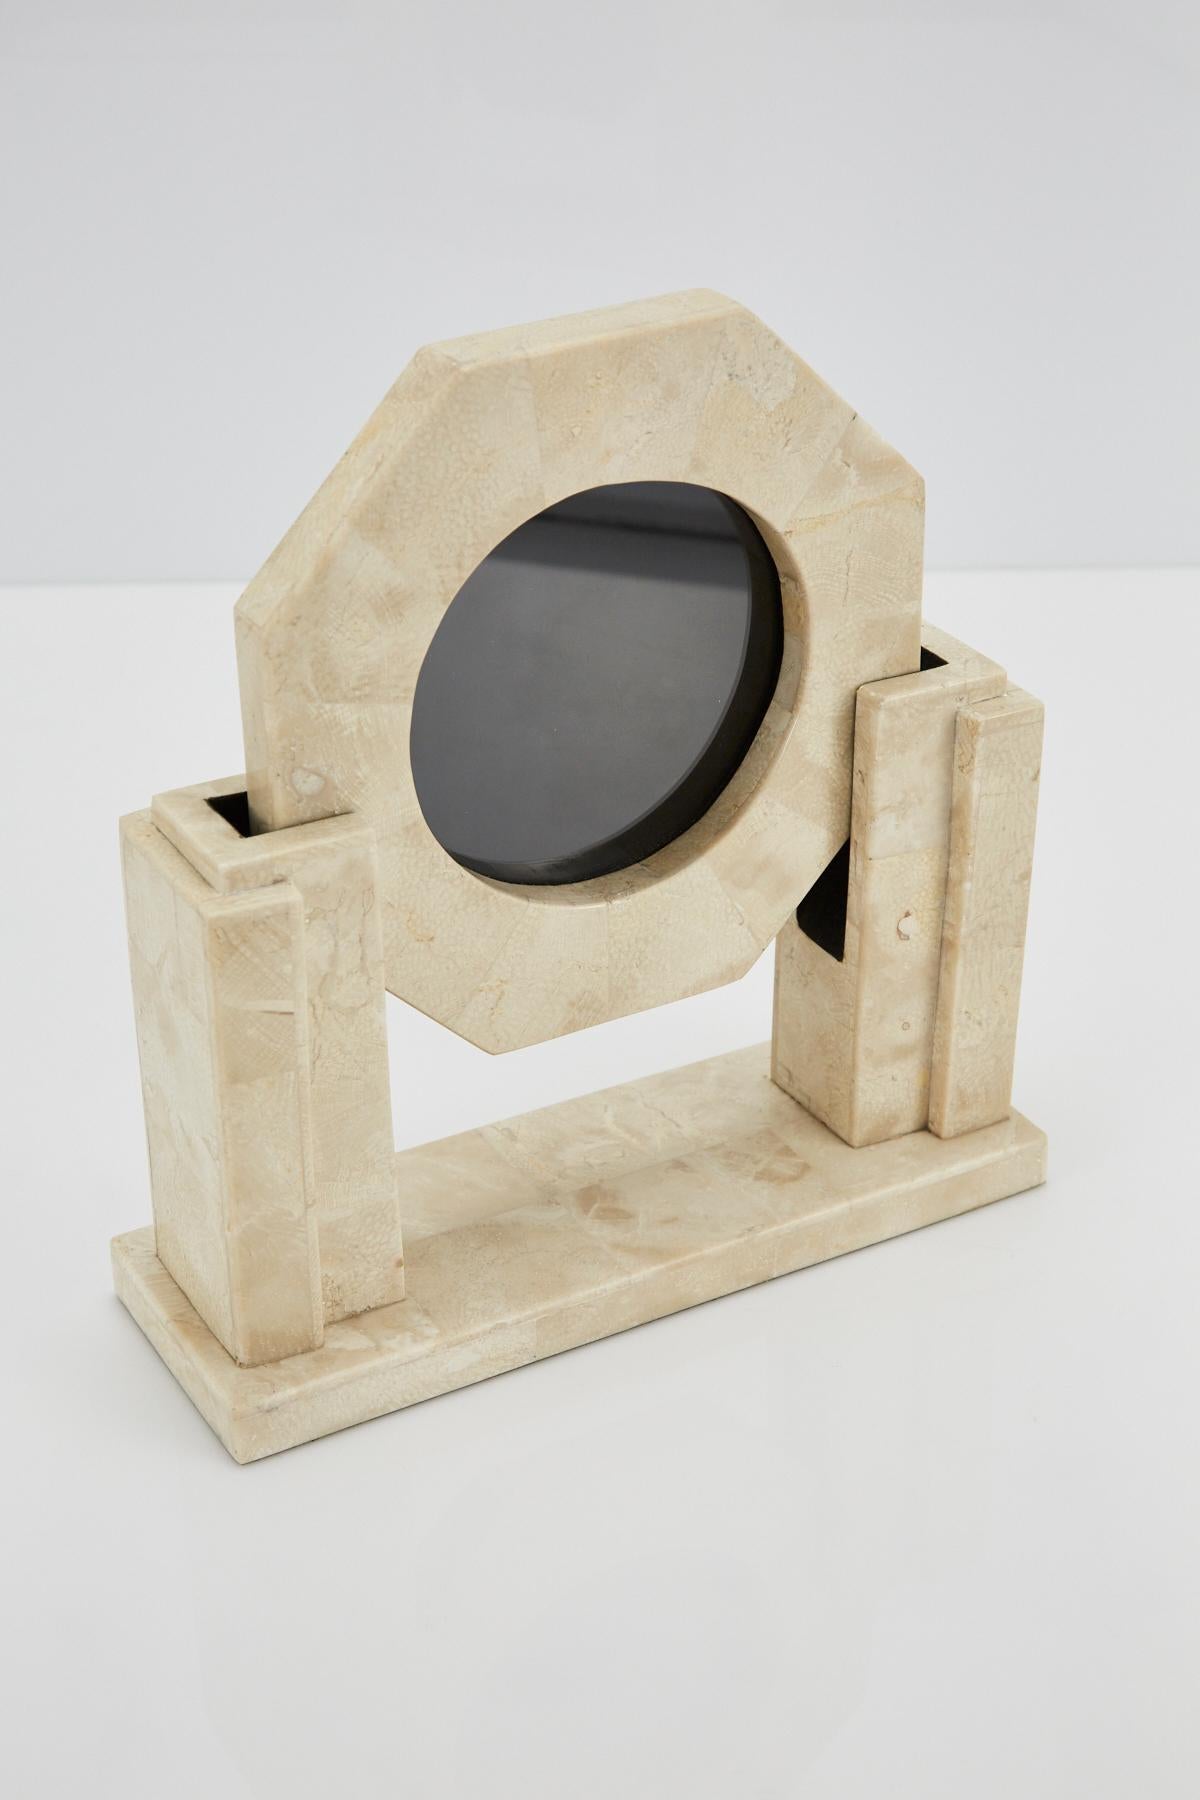 Two-part picture frame consisting of a beige tessellated stone base which holds and elevates the octagonal picture holder. Circular opening for picture measures 5 in. diameter.

All furnishings are made from 100% natural Fossil Stone or Seashell